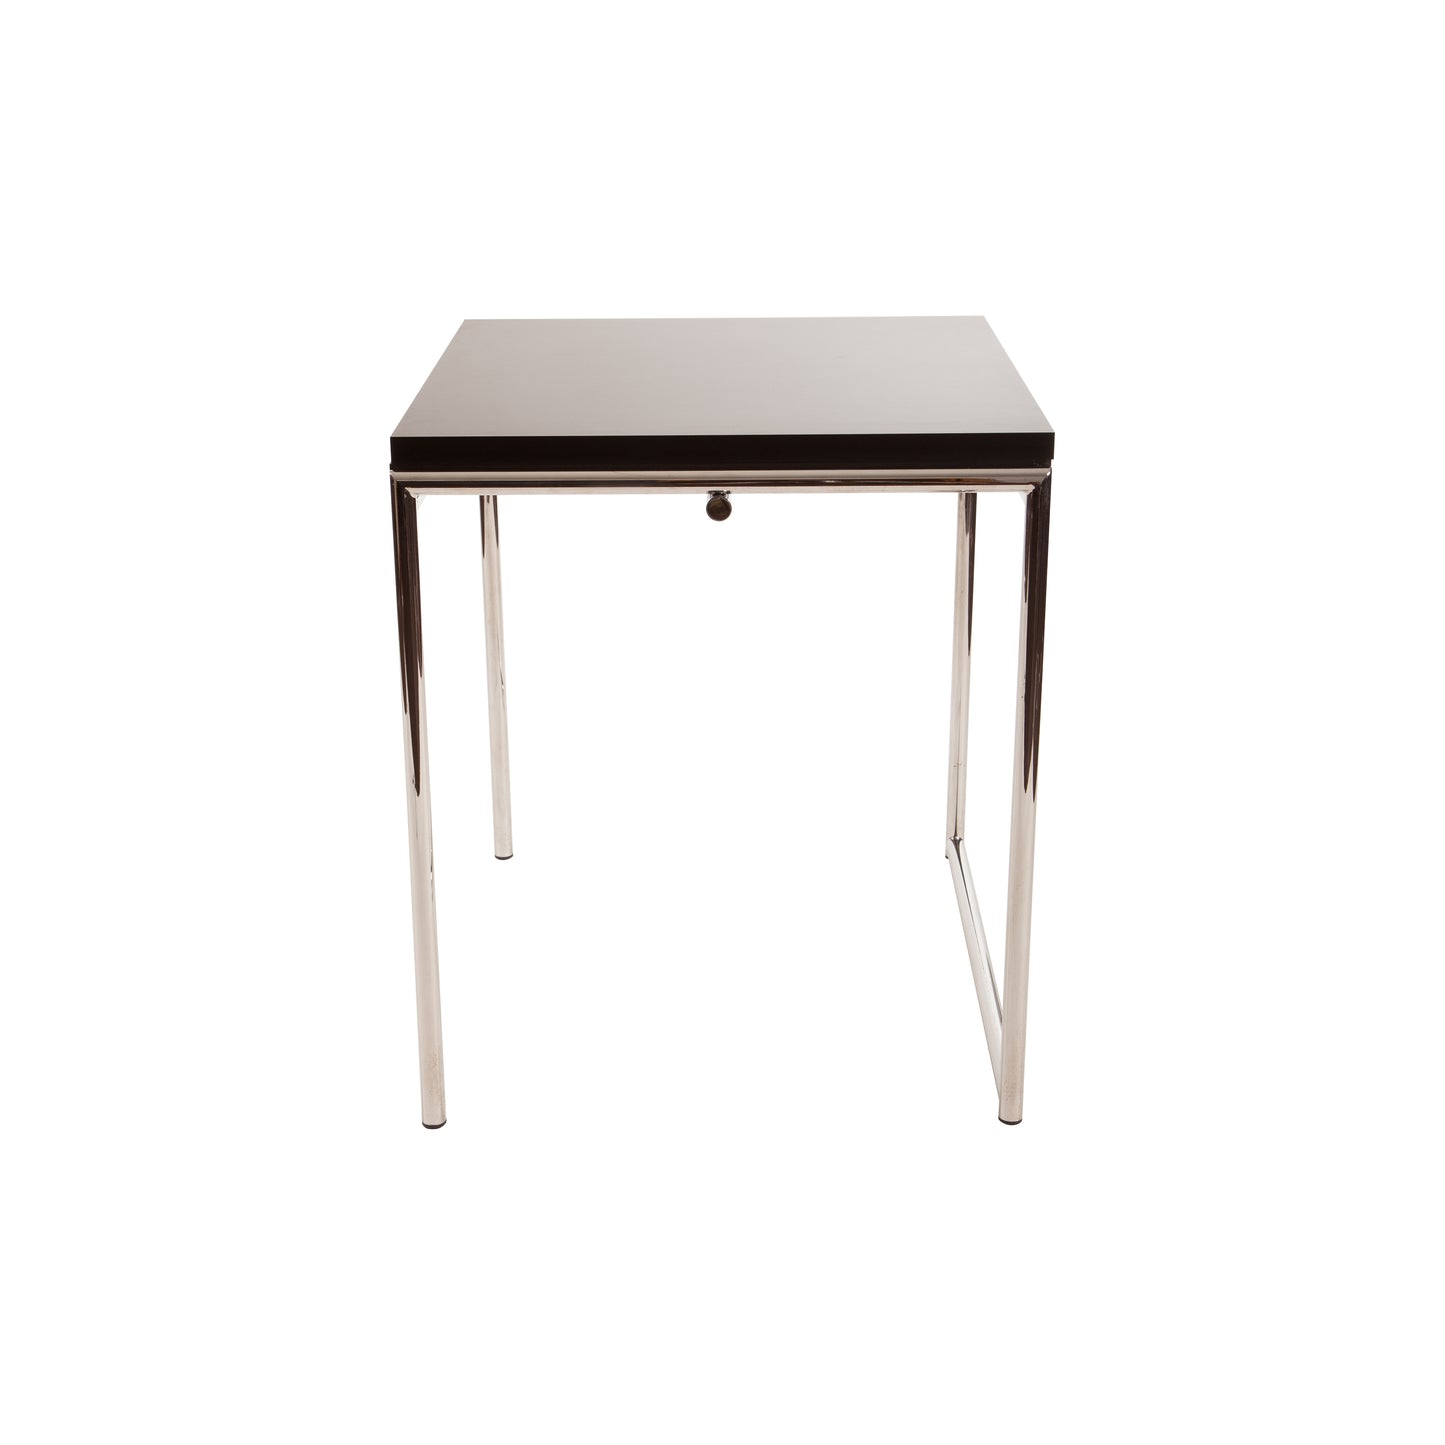 Folding table style | Black | Front